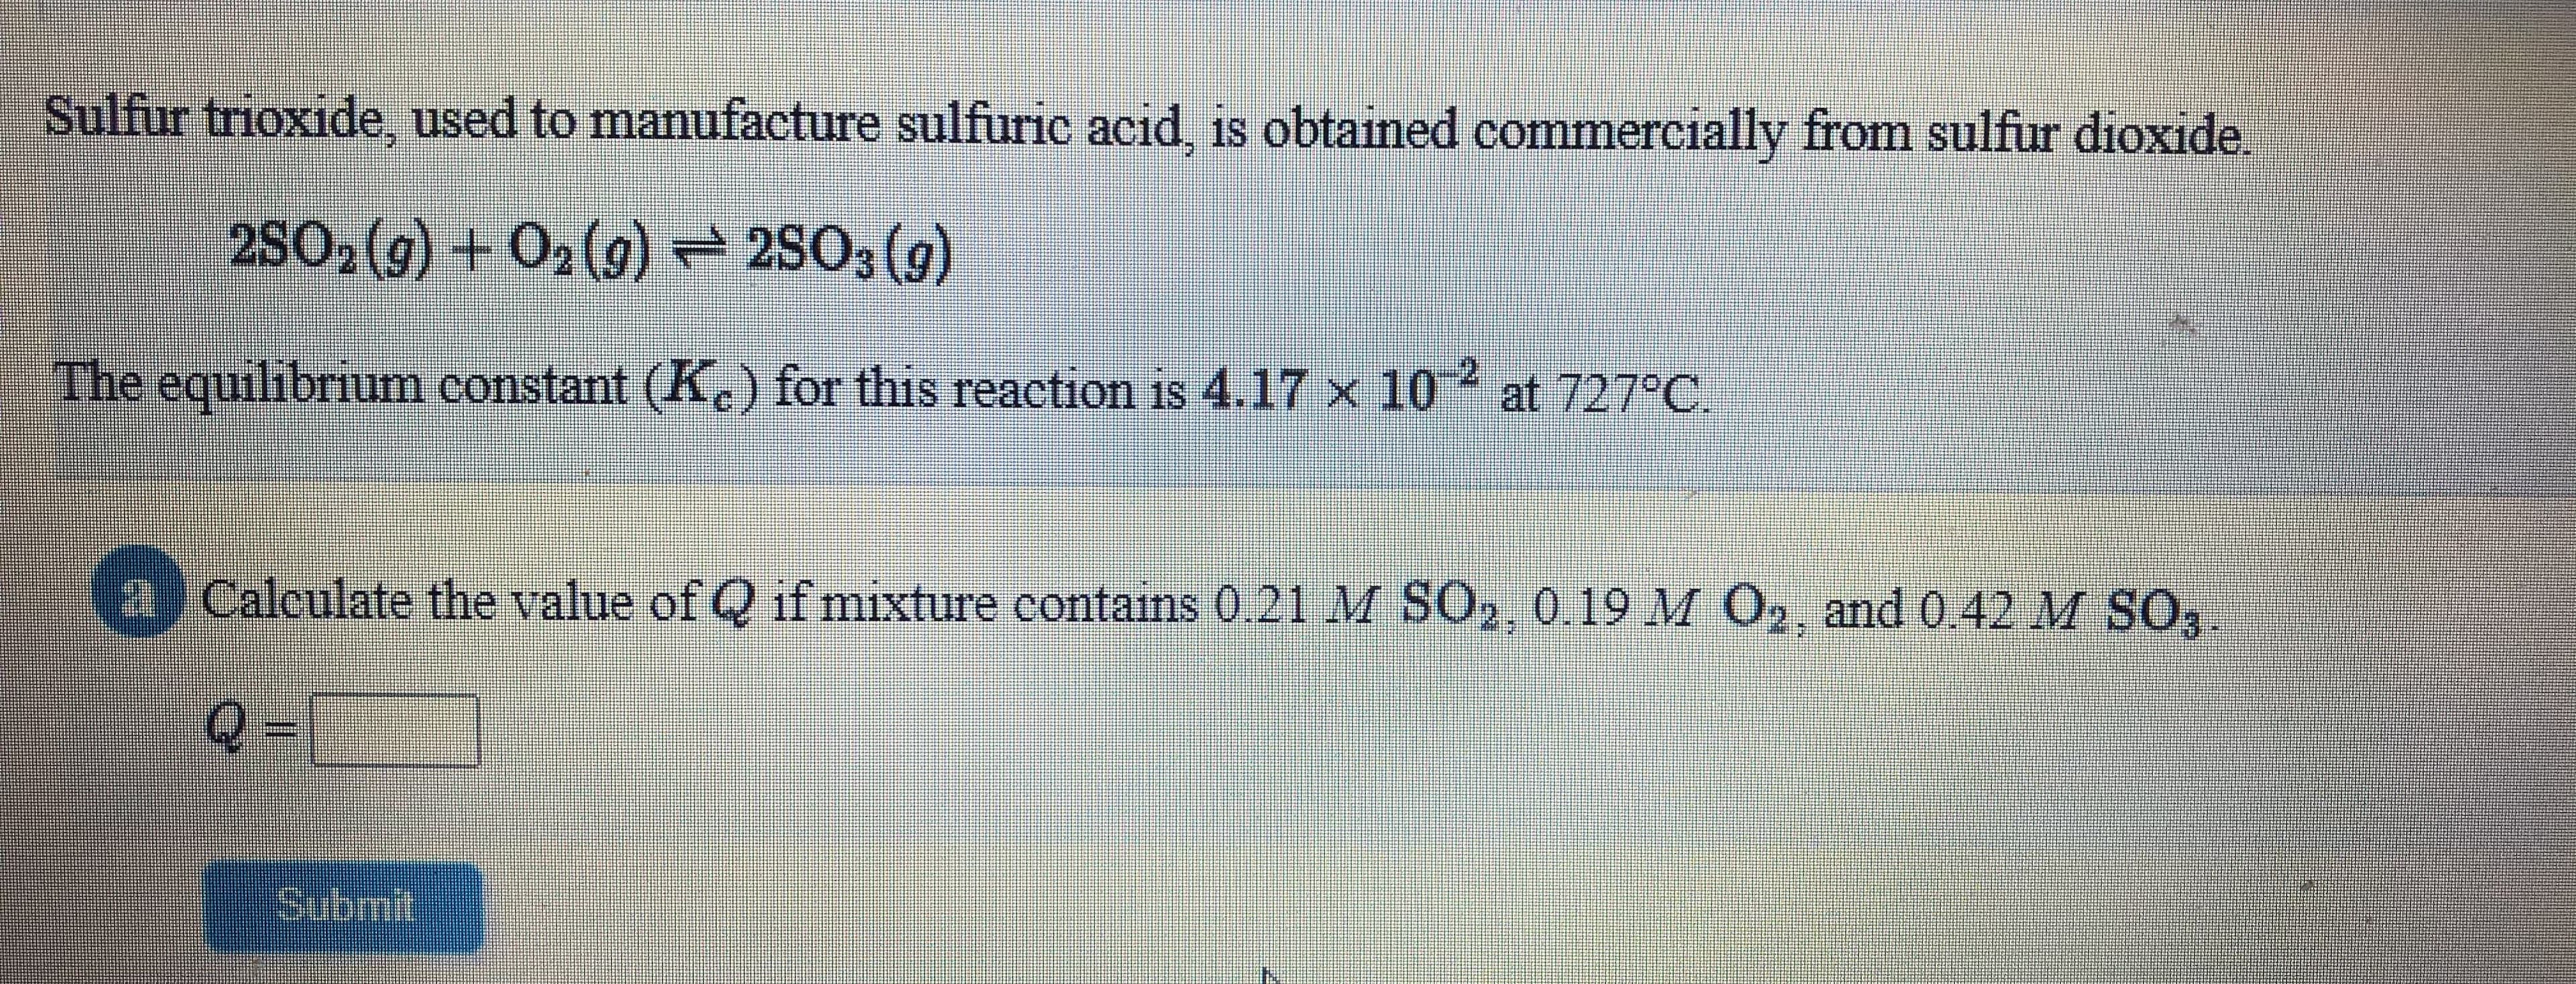 Calculate the value of Q if mixture contains 0.21 M SO,, 0.19 M 02, and 0.42 M SO,
